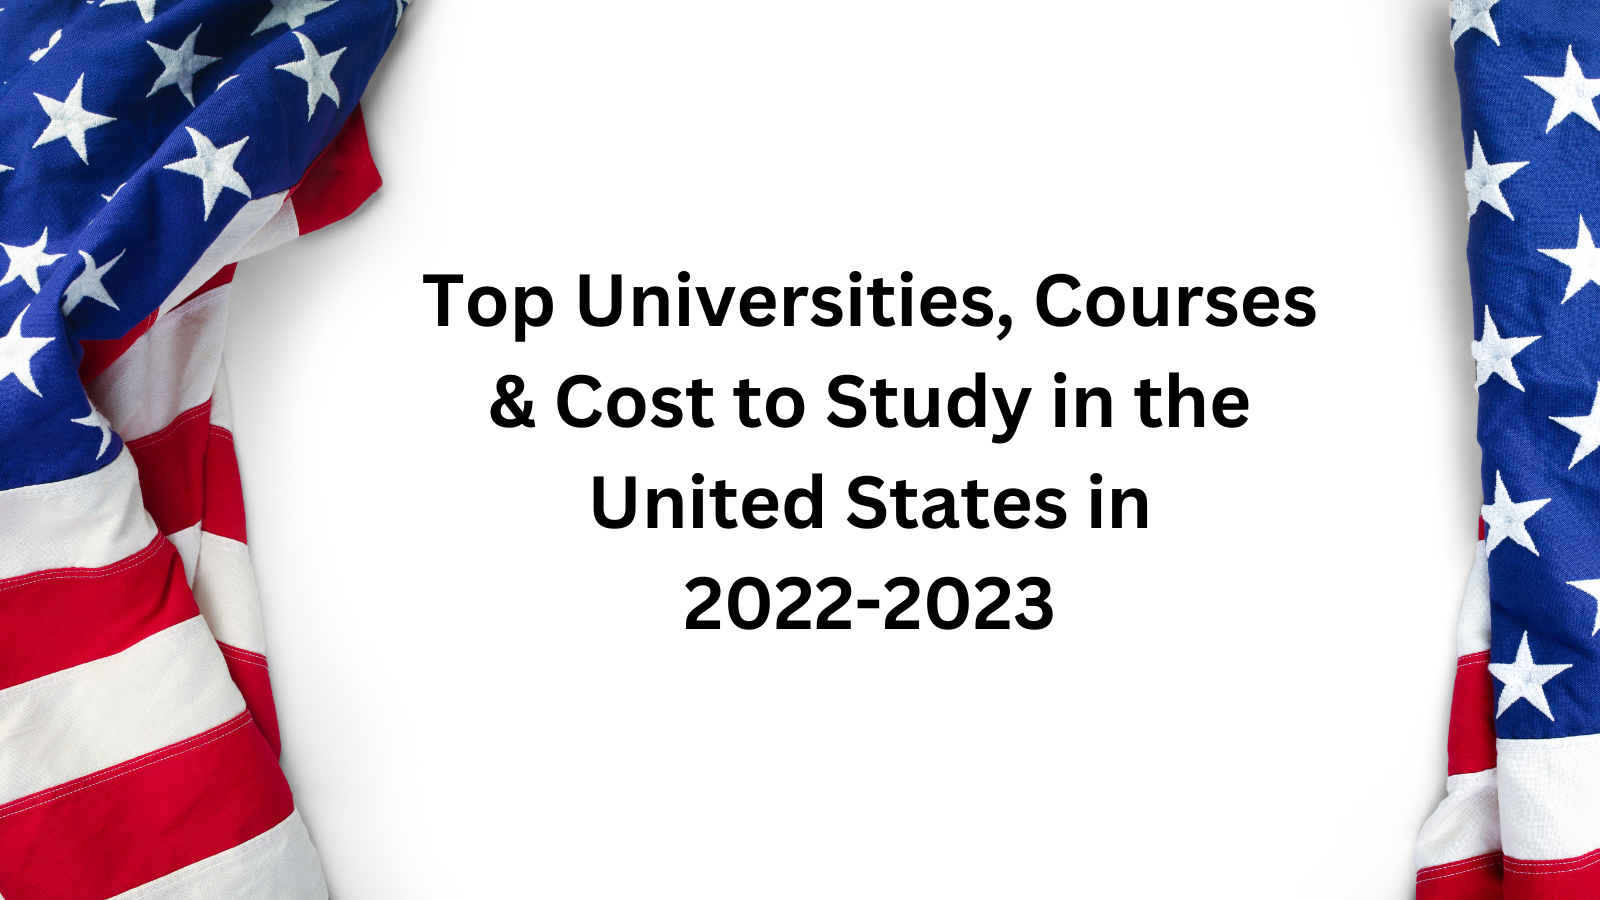 Top Universities, Courses & Cost to Study in the United States